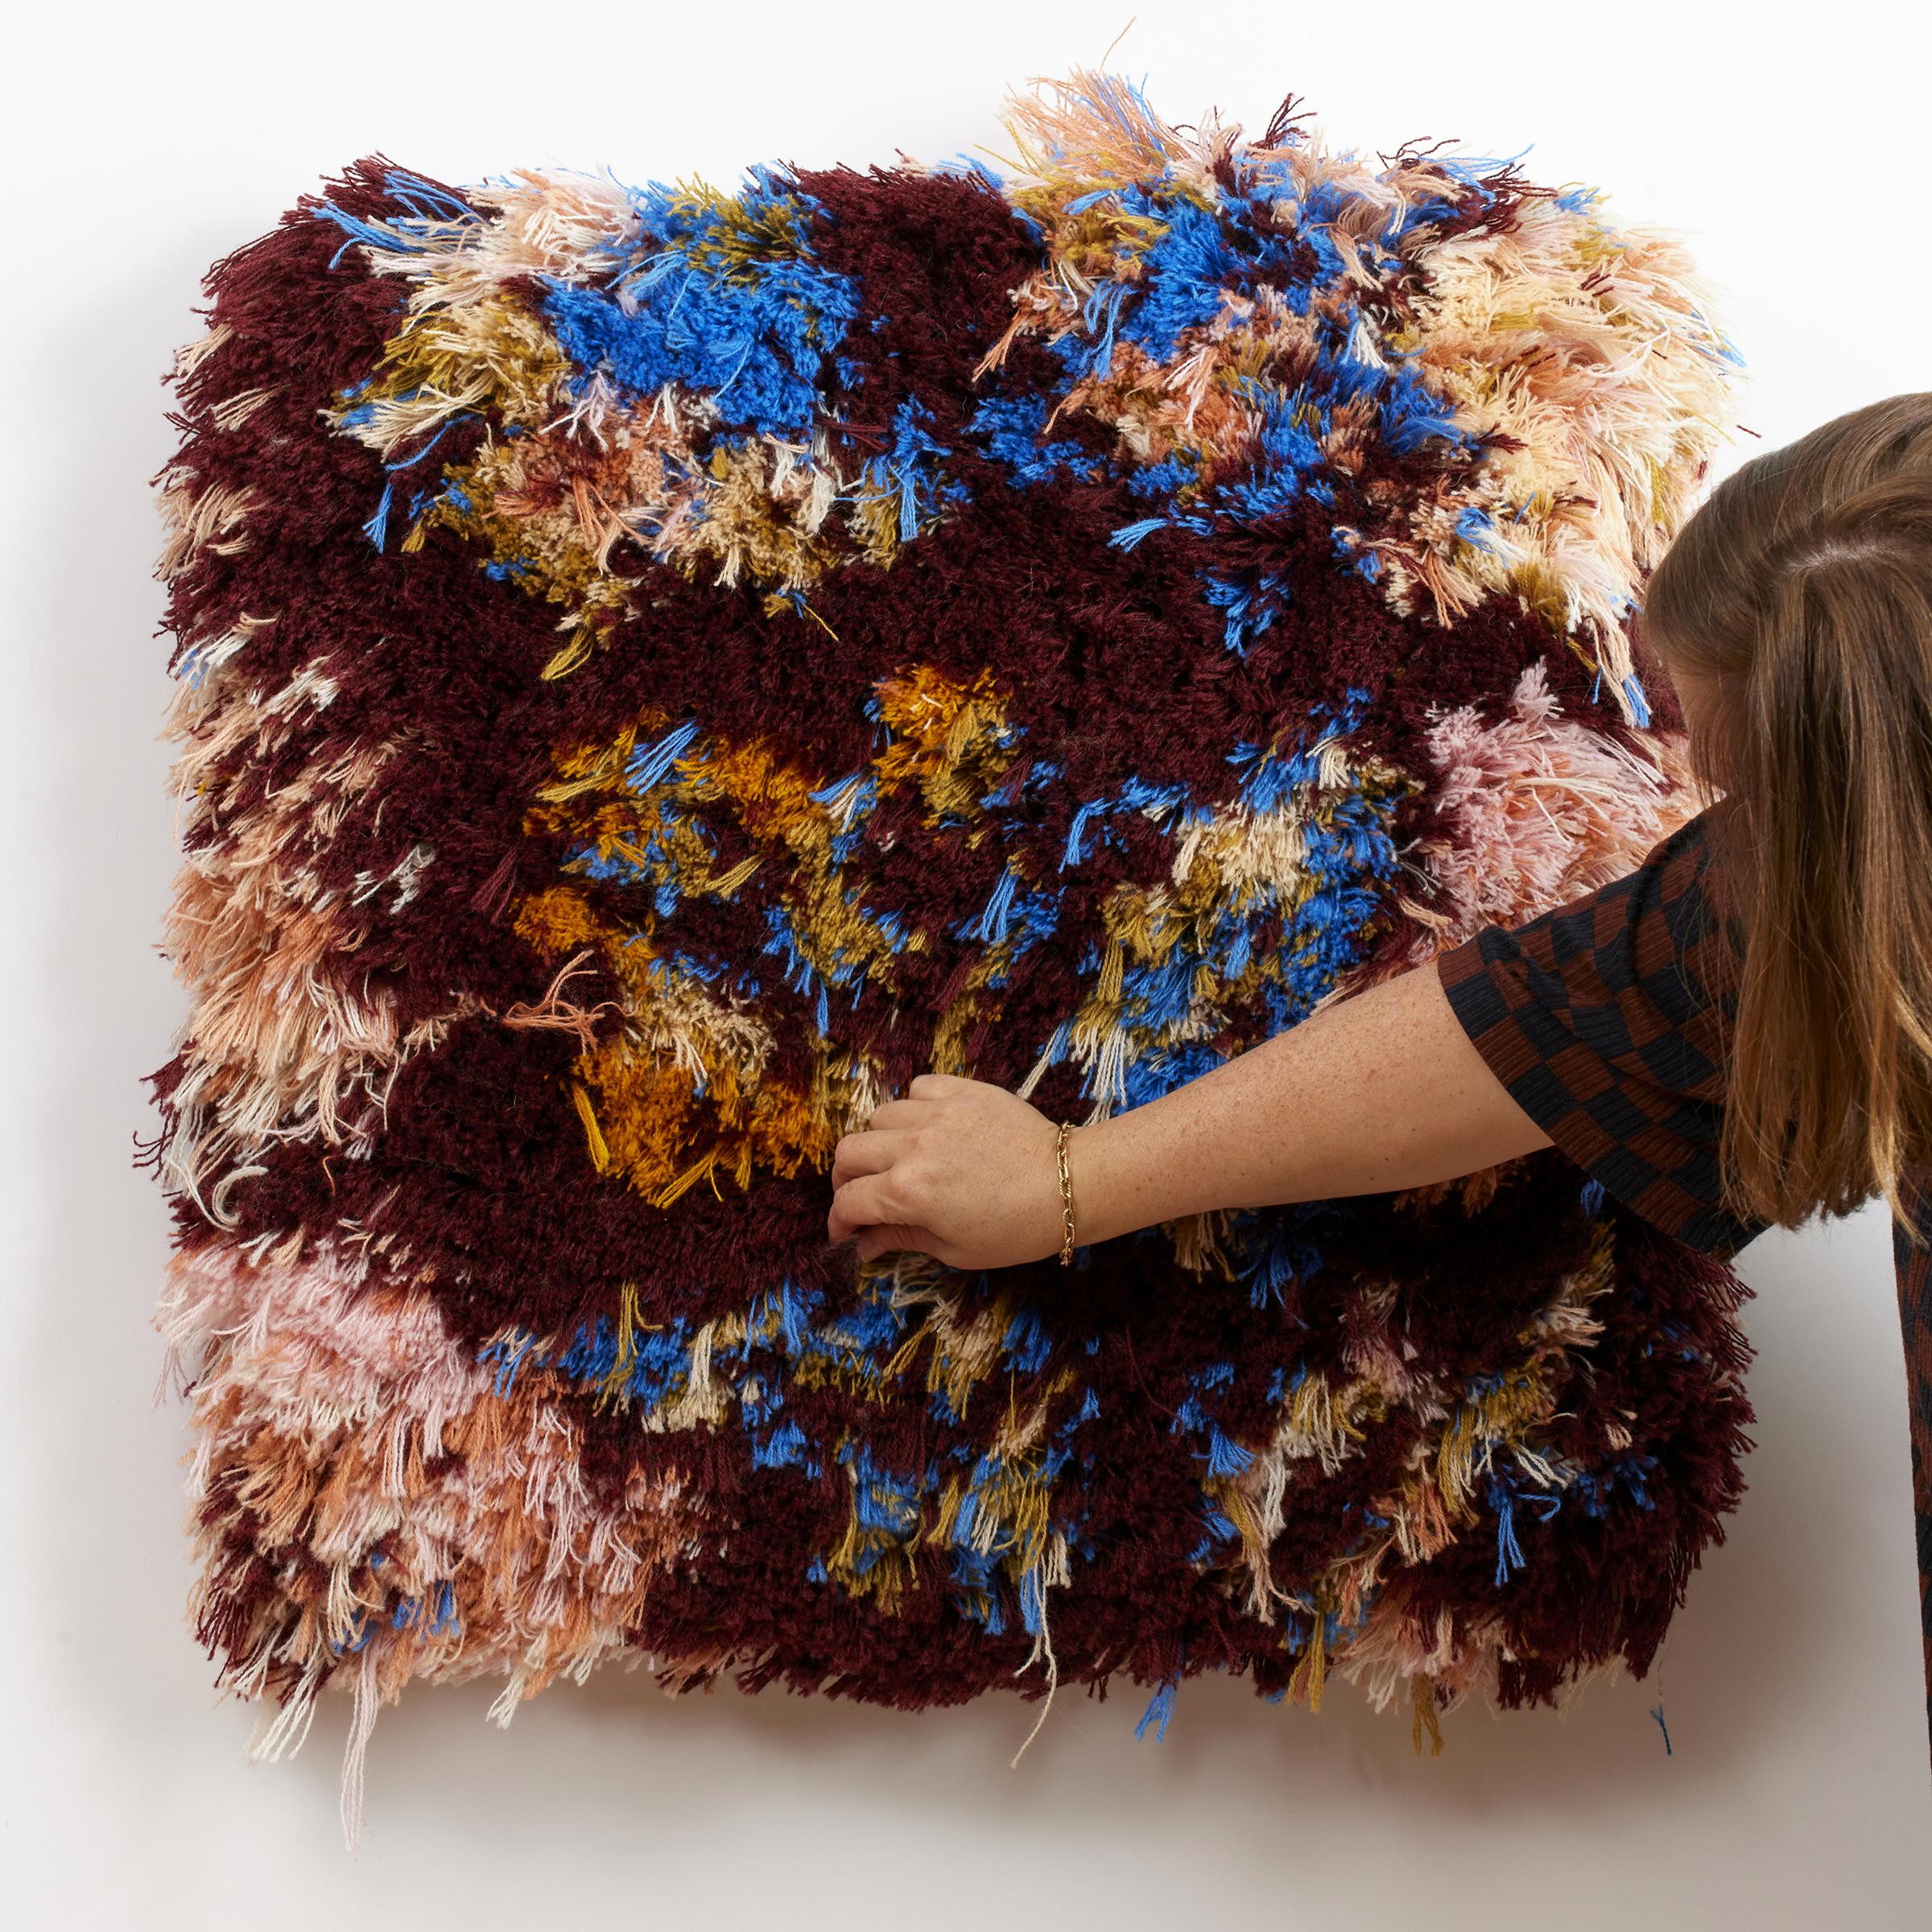 'Hand in Hand' - contemporary fiber art, texture, pattern, dots, tufting - Sculpture by Trish Andersen